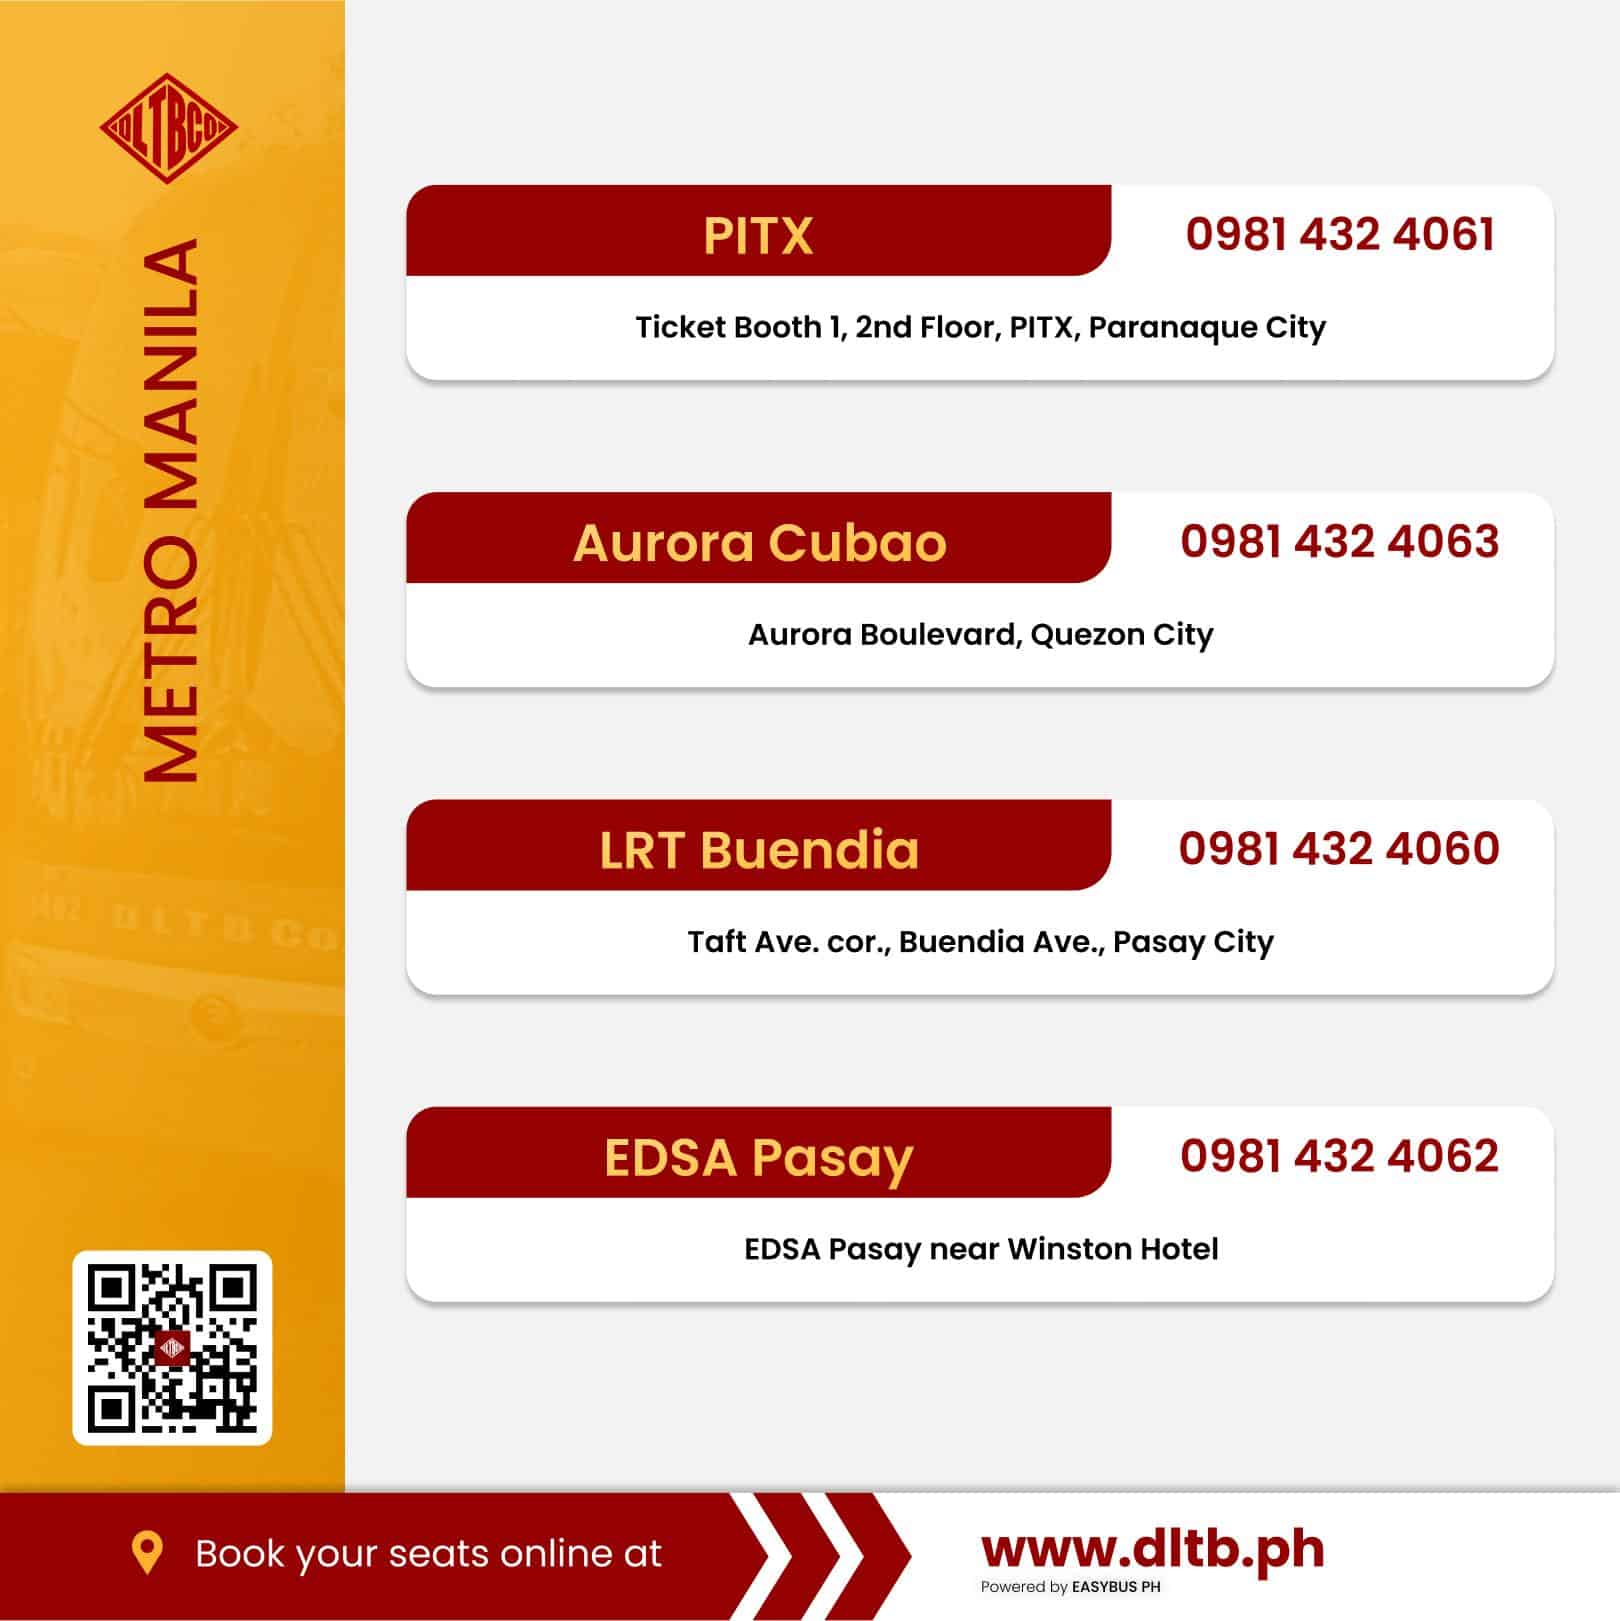 DLTB Contact Numbers